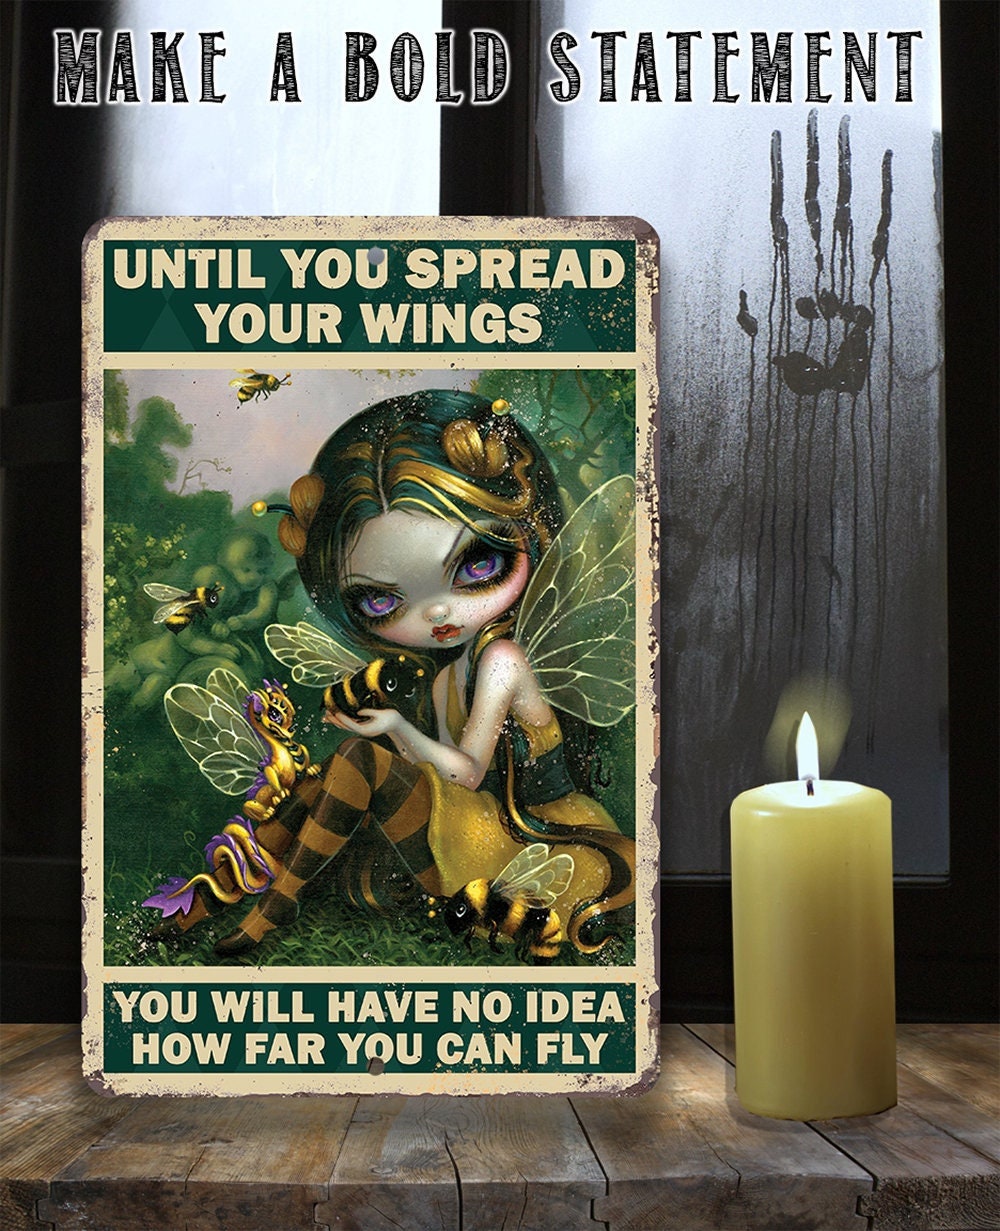 Until You Spread Your Wings - 8" x 12" or 12" x 18" Aluminum Tin Awesome Gothic Metal Poster Lone Star Art 